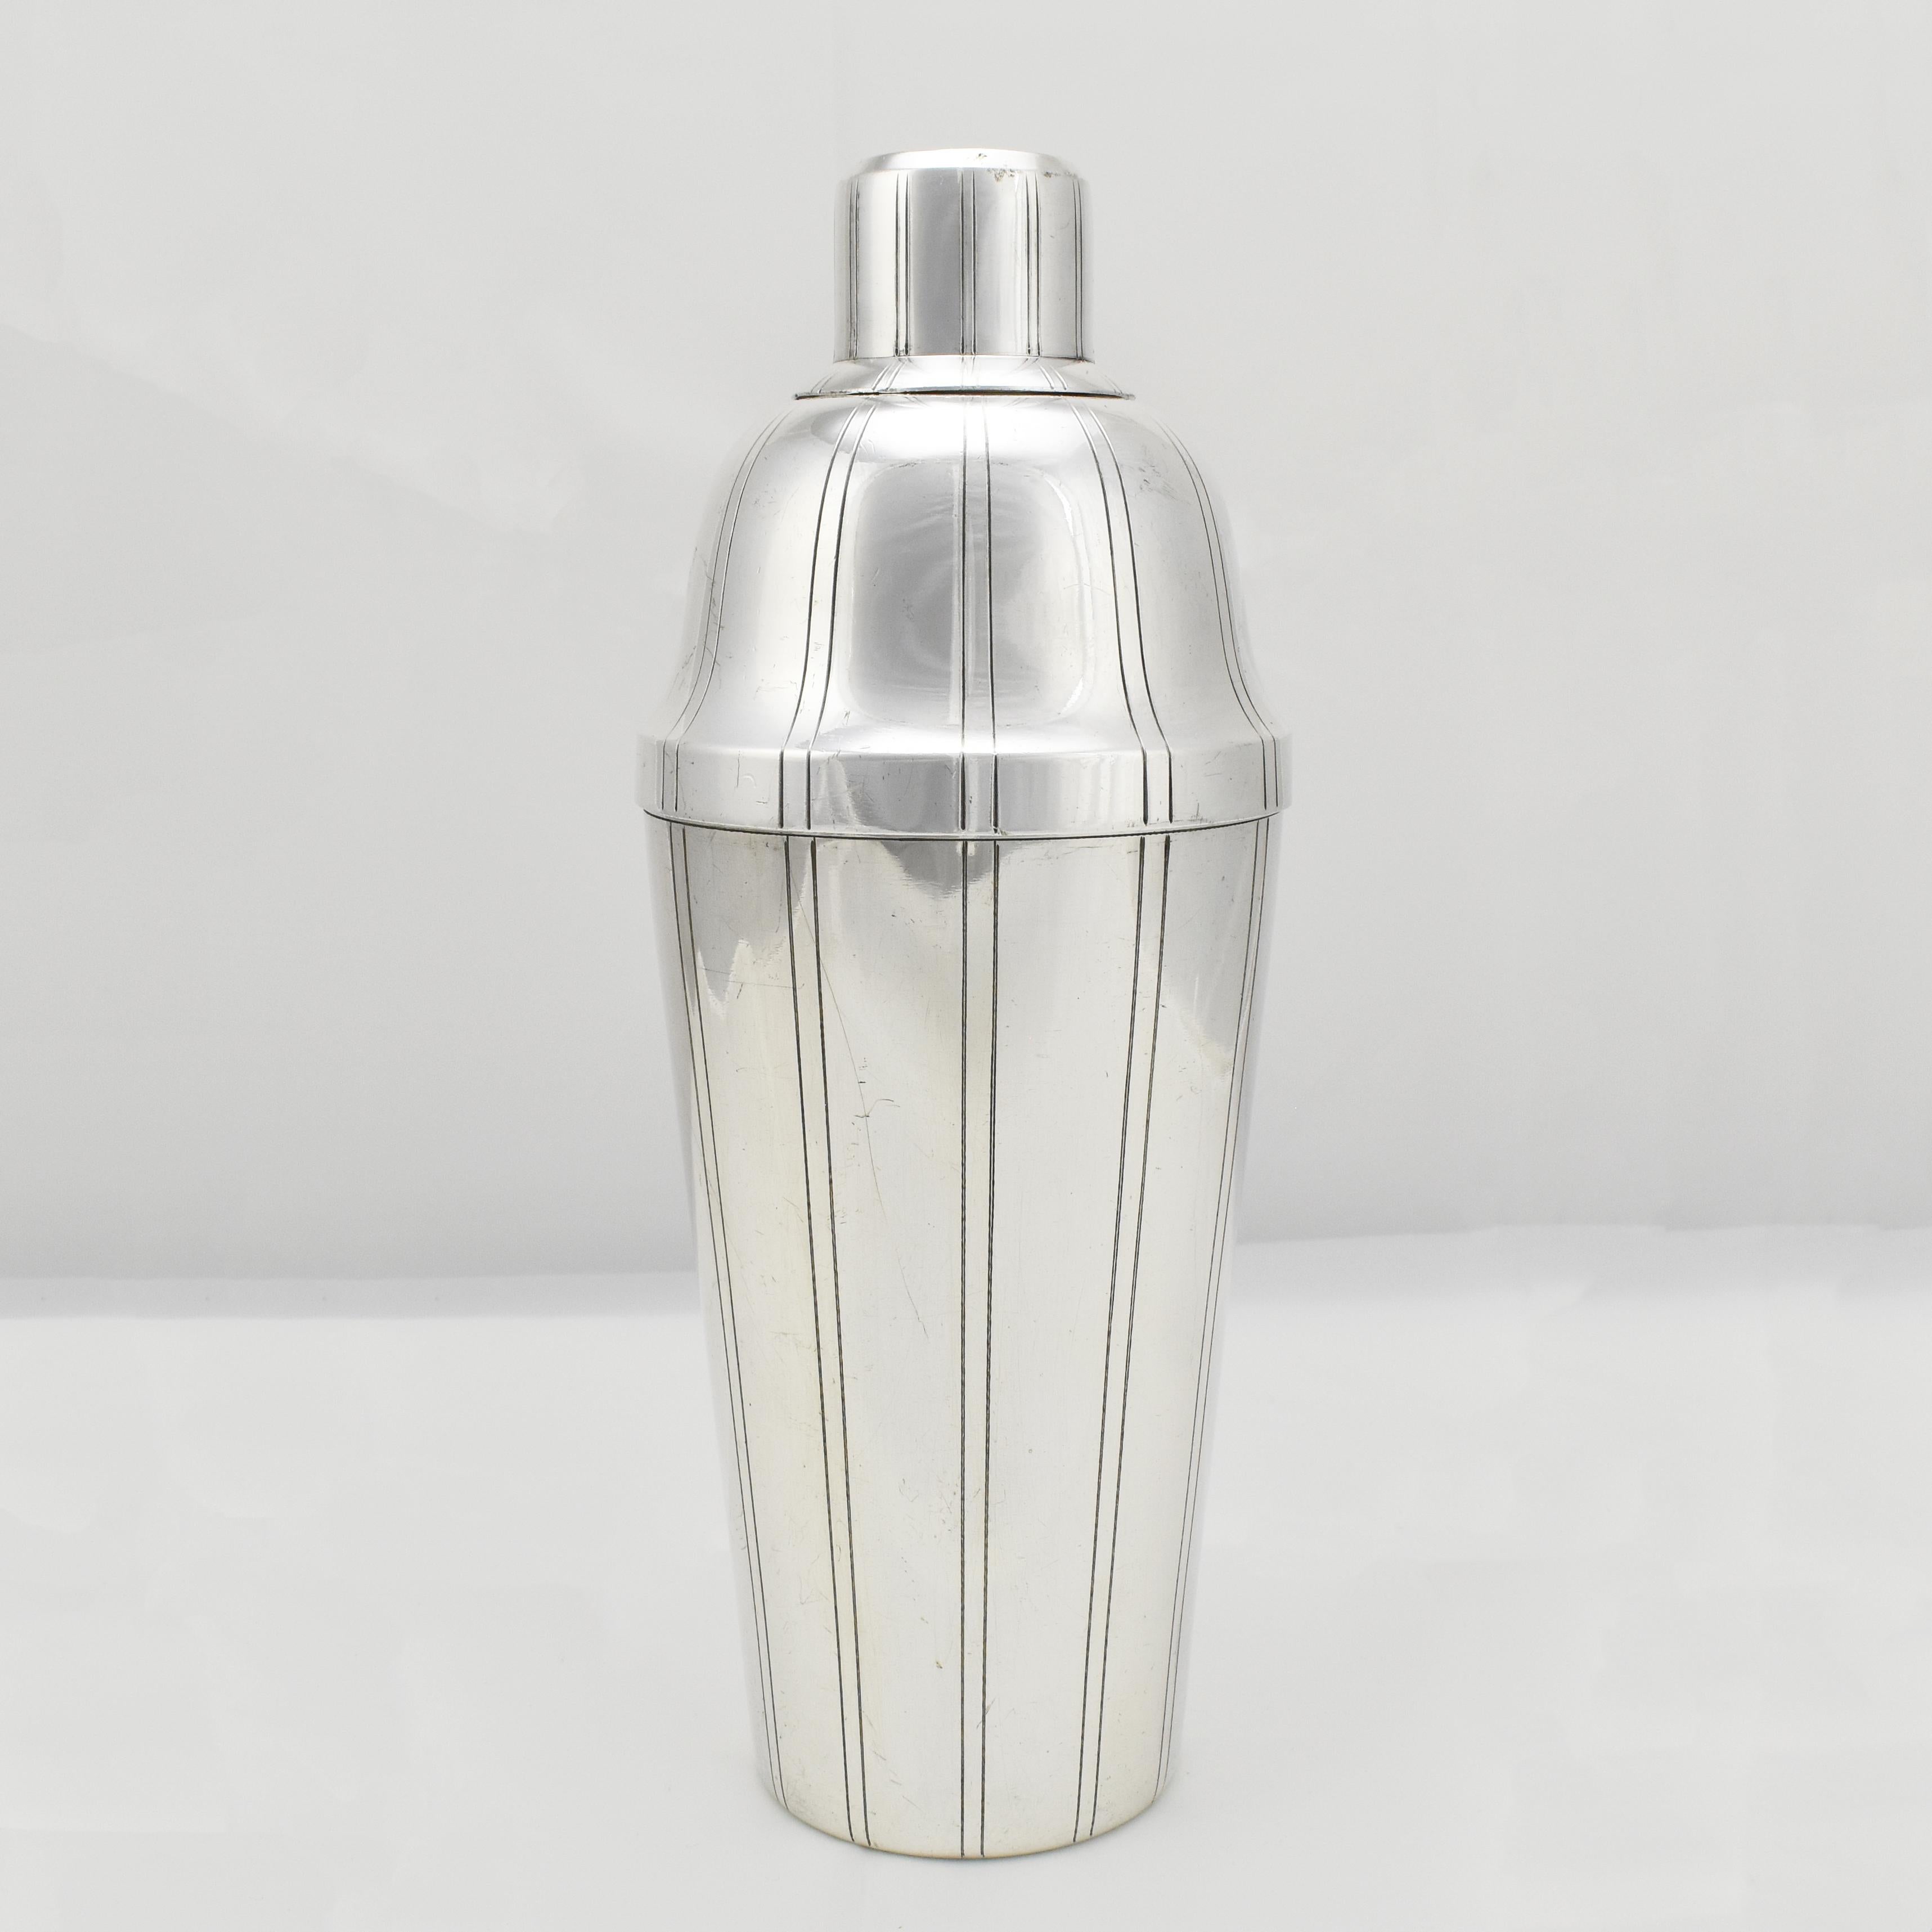 Art Deco Cocktail Martini Shaker Silverplate by Boulenger In Good Condition For Sale In Bad Säckingen, DE